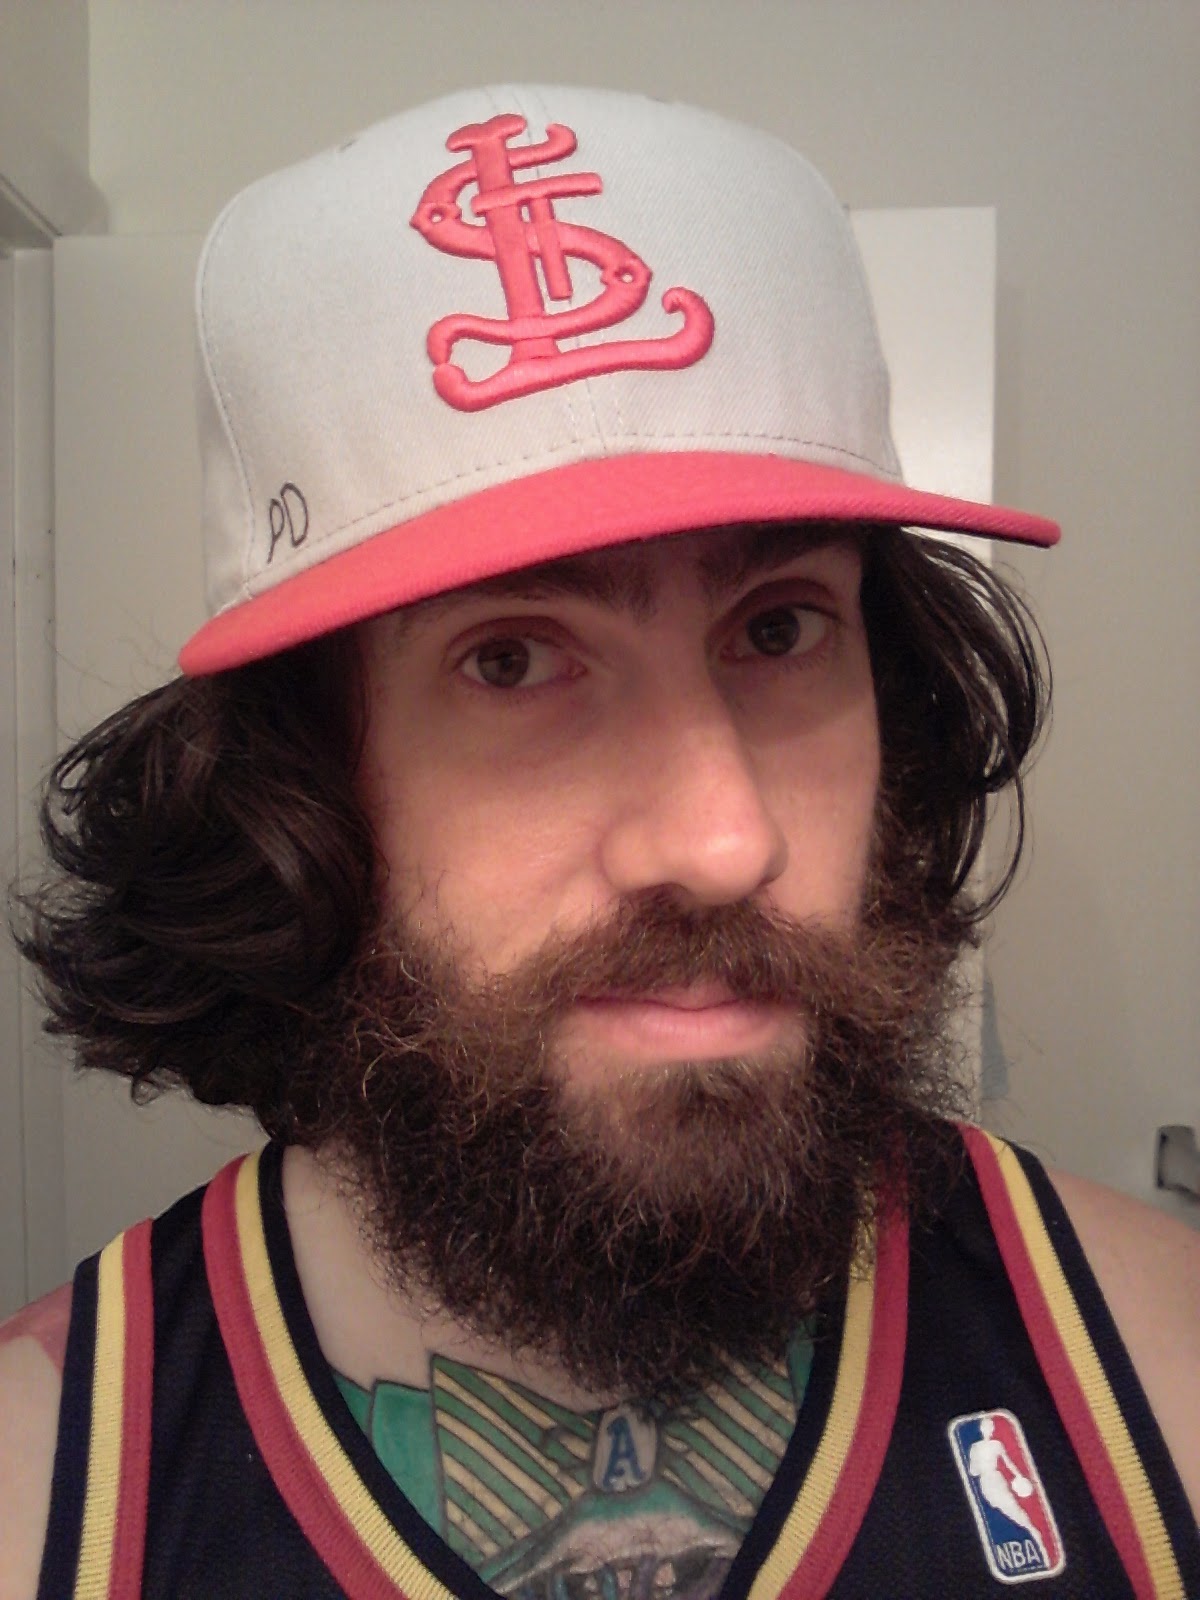 Hats and Tats: A Lifestyle: August 5- St. Louis Cardinals